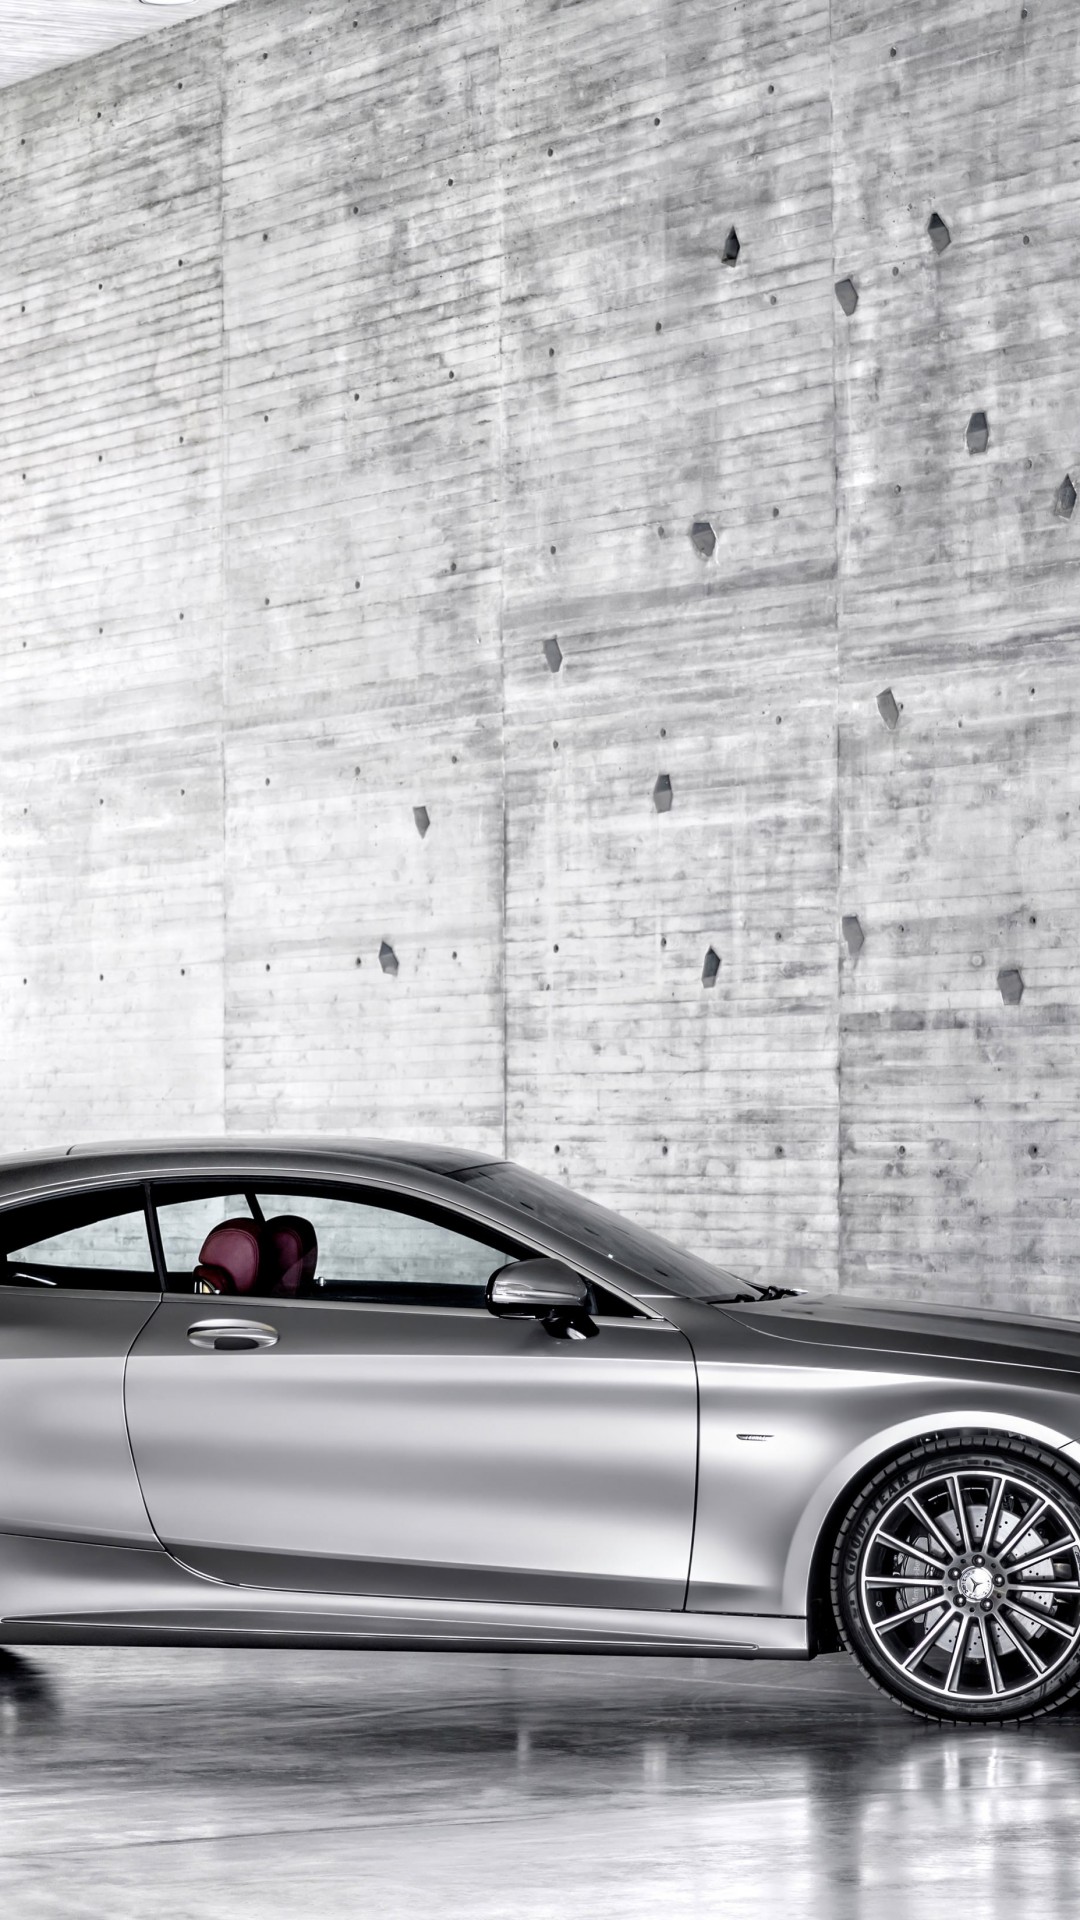 2015 Mercedes-Benz S-Class Coupe Wallpaper for LG G2